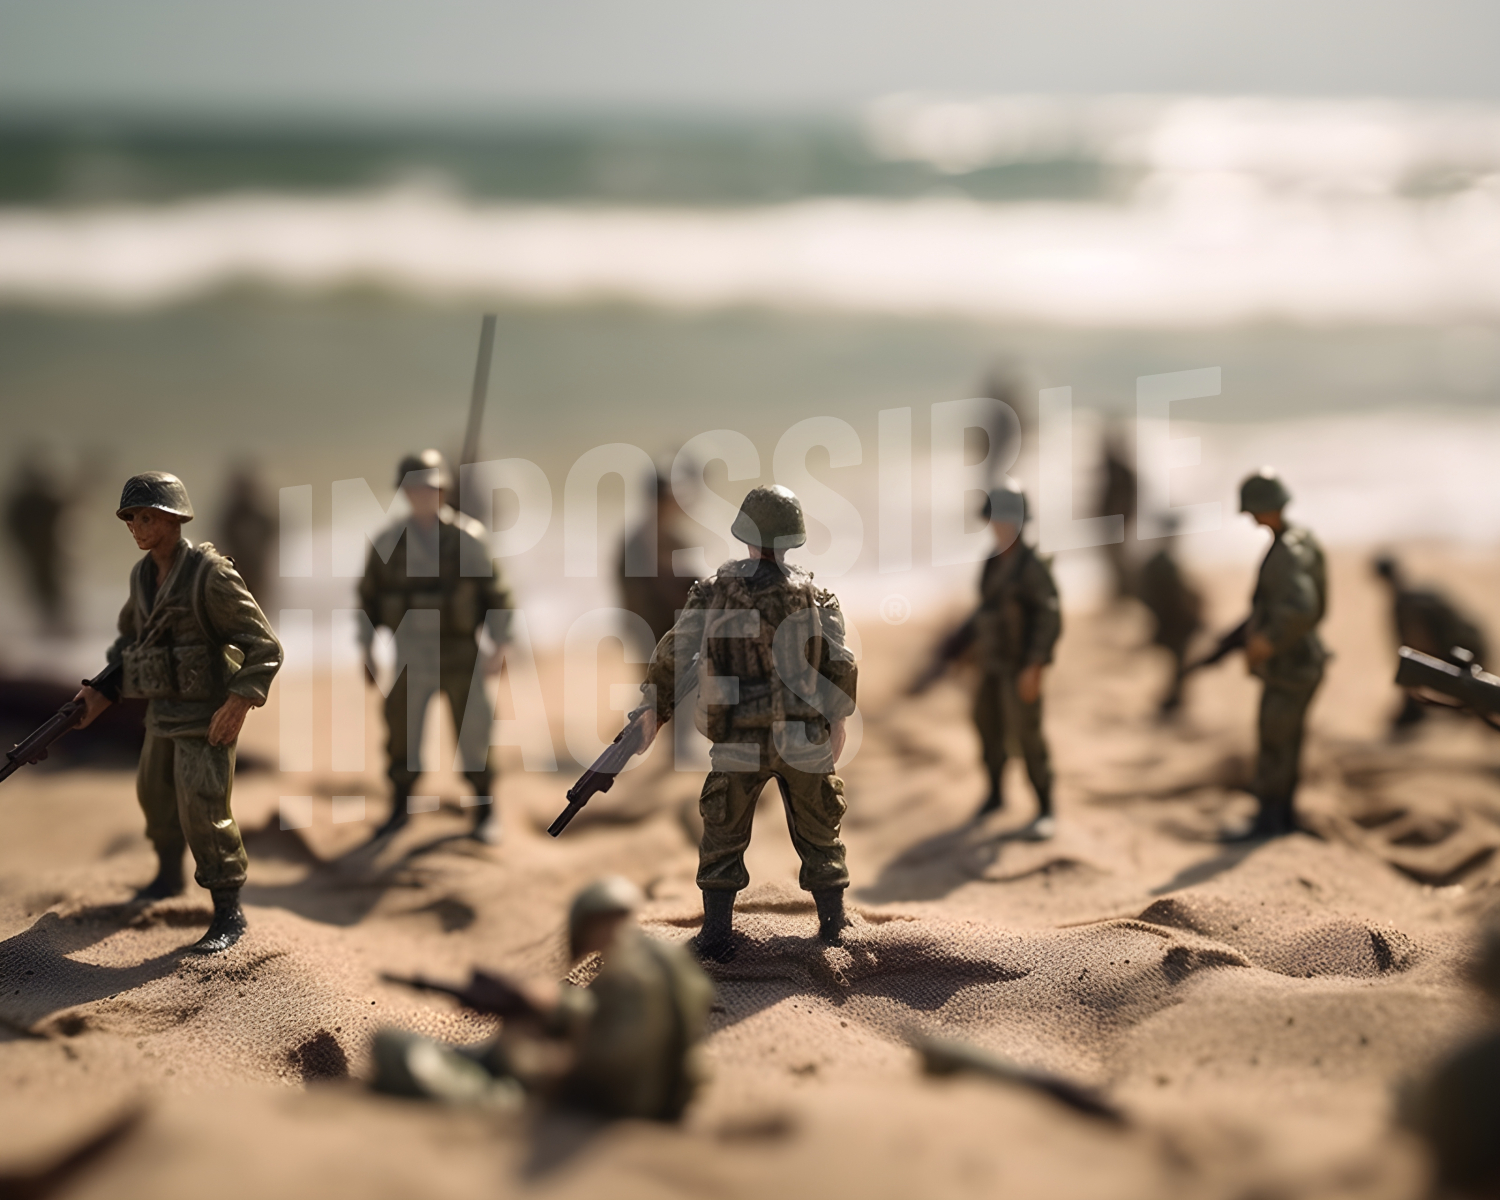 A group of toy soldiers standing on top of a sandy beach - 